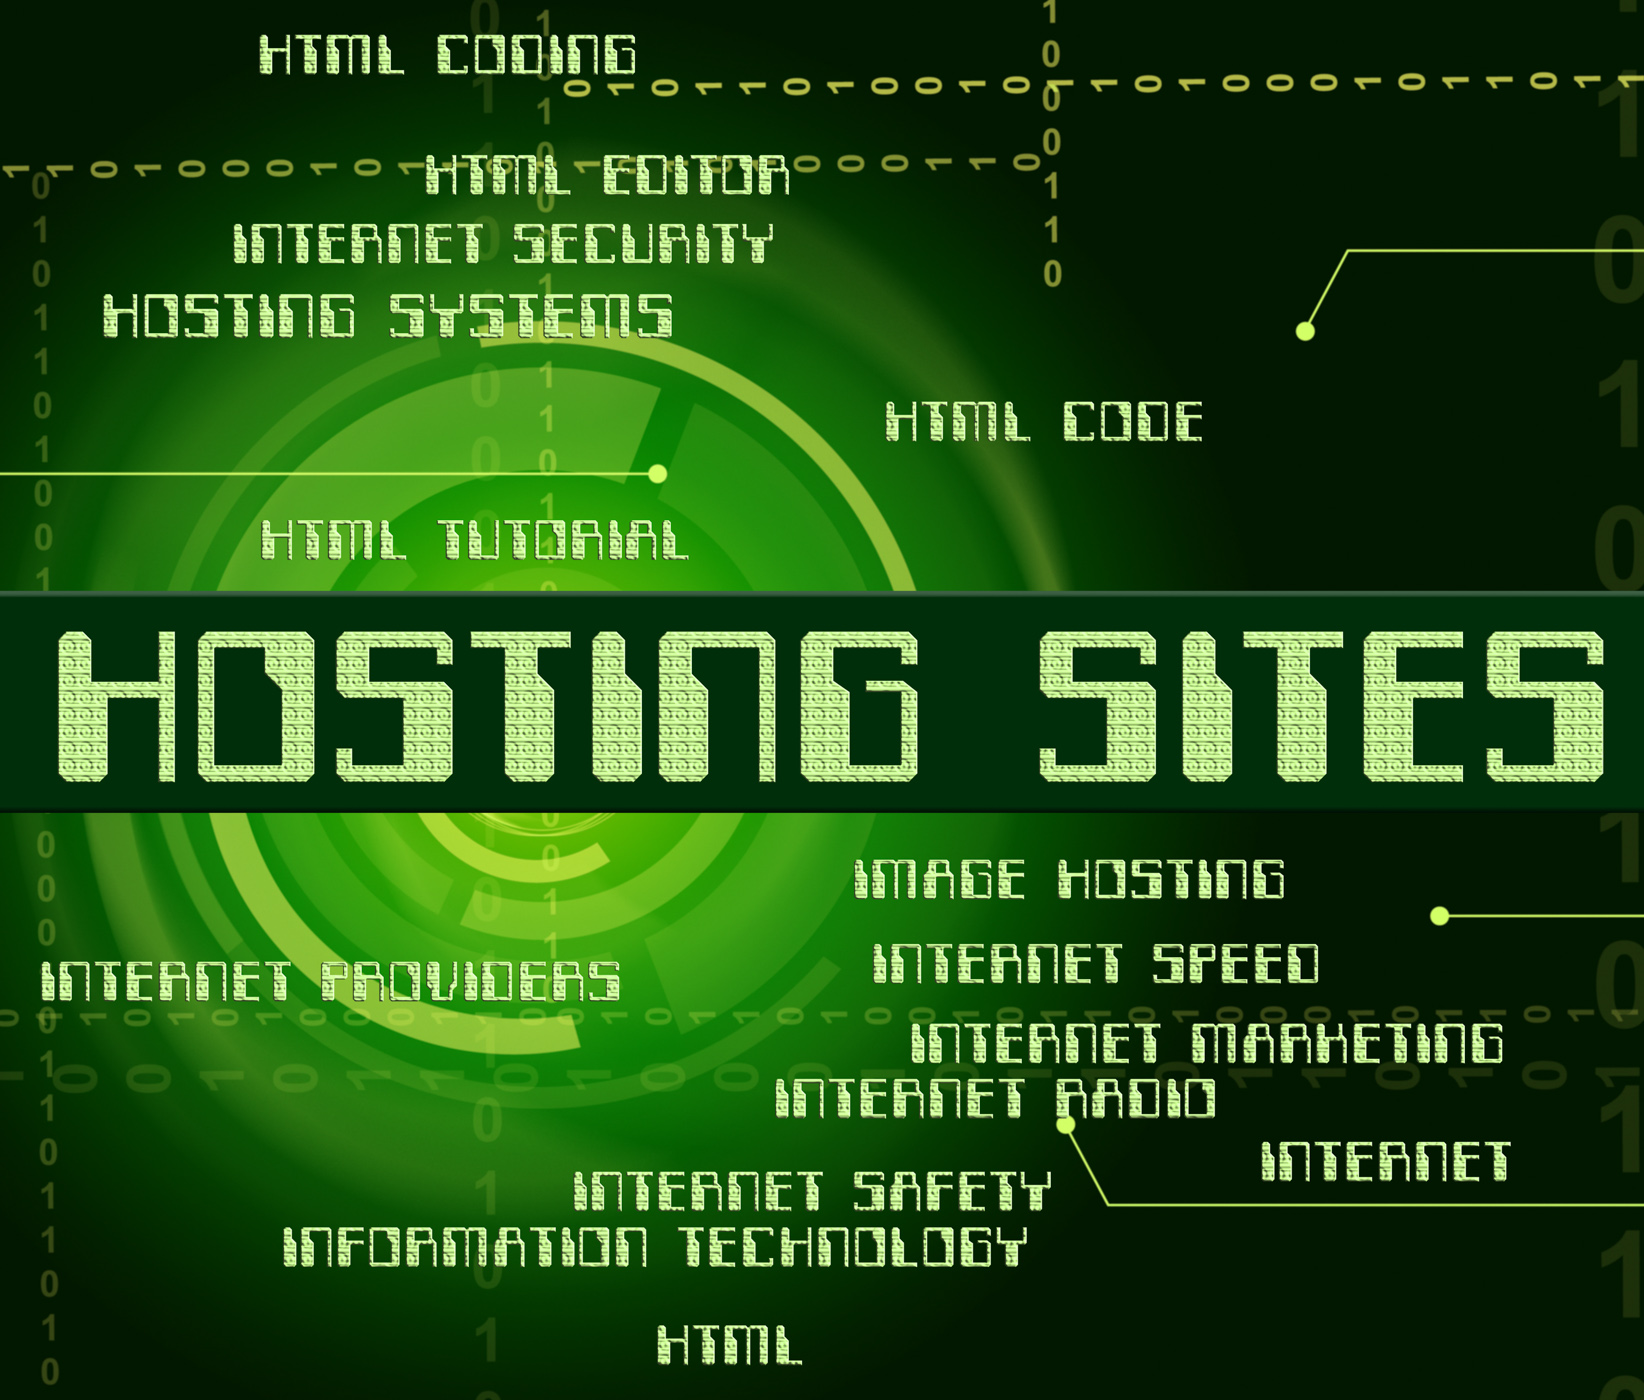 Hosting sites represents computer websites and internet photo